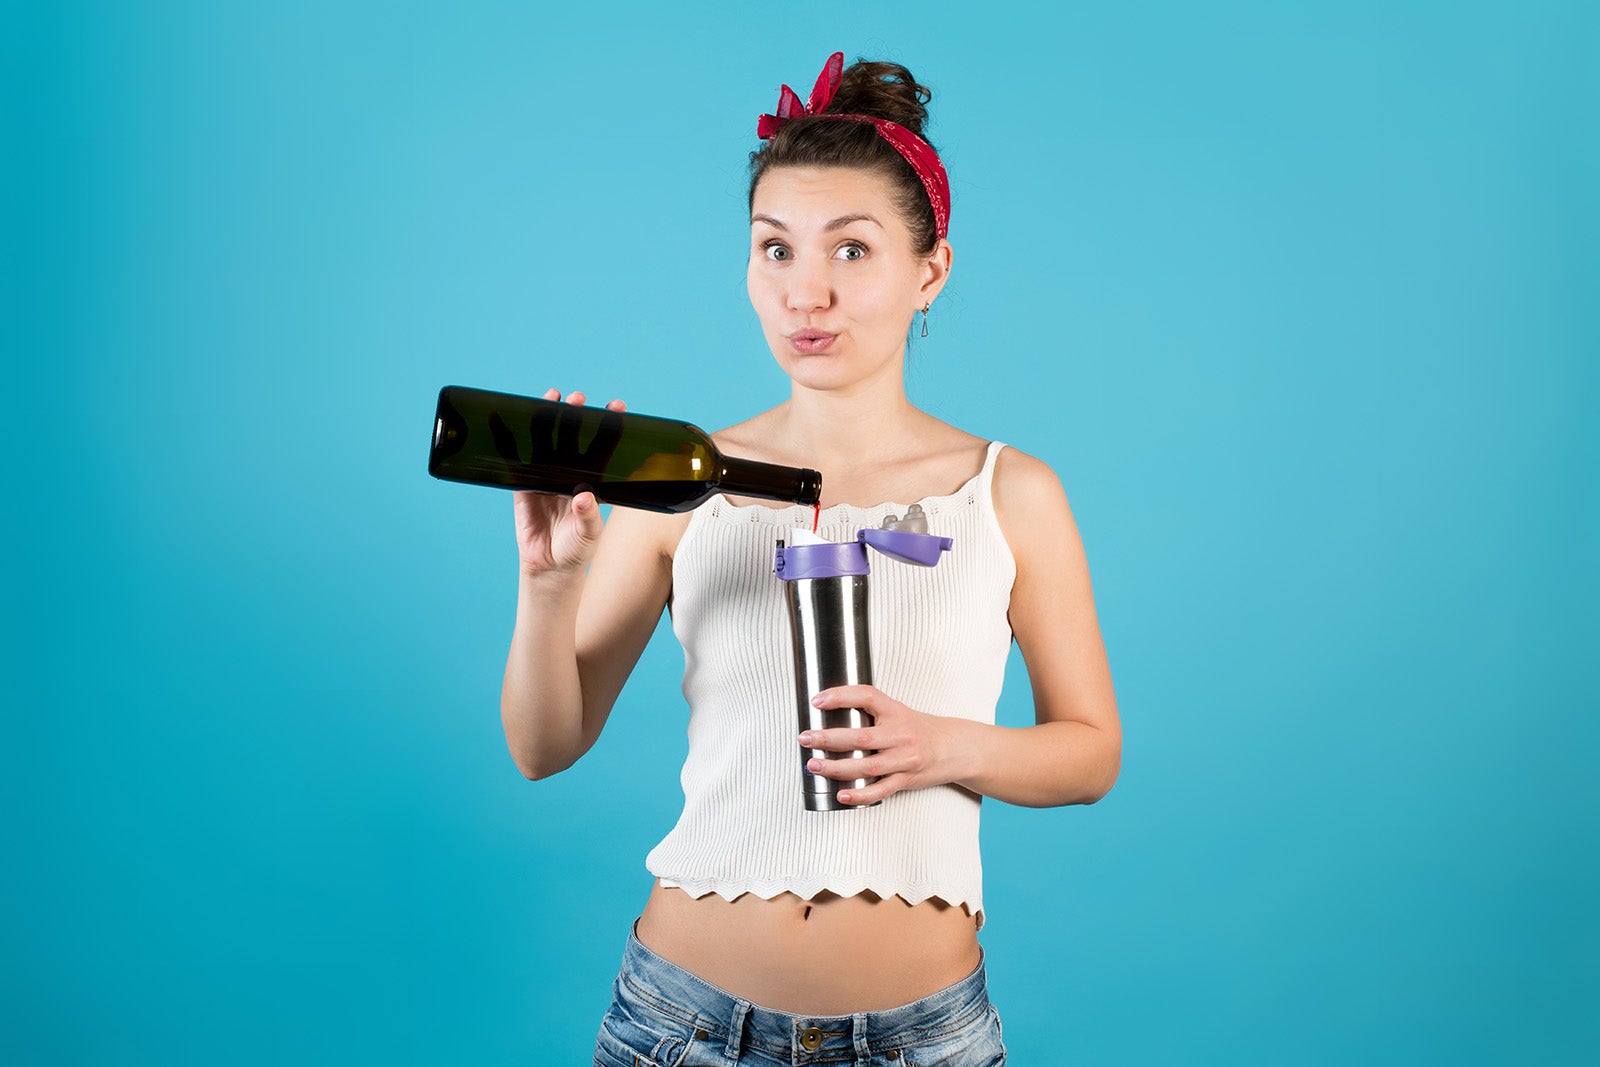 The Original WineRack Booze Bra Flask - The Most Hilarious Way To Sneak In  The Wine!